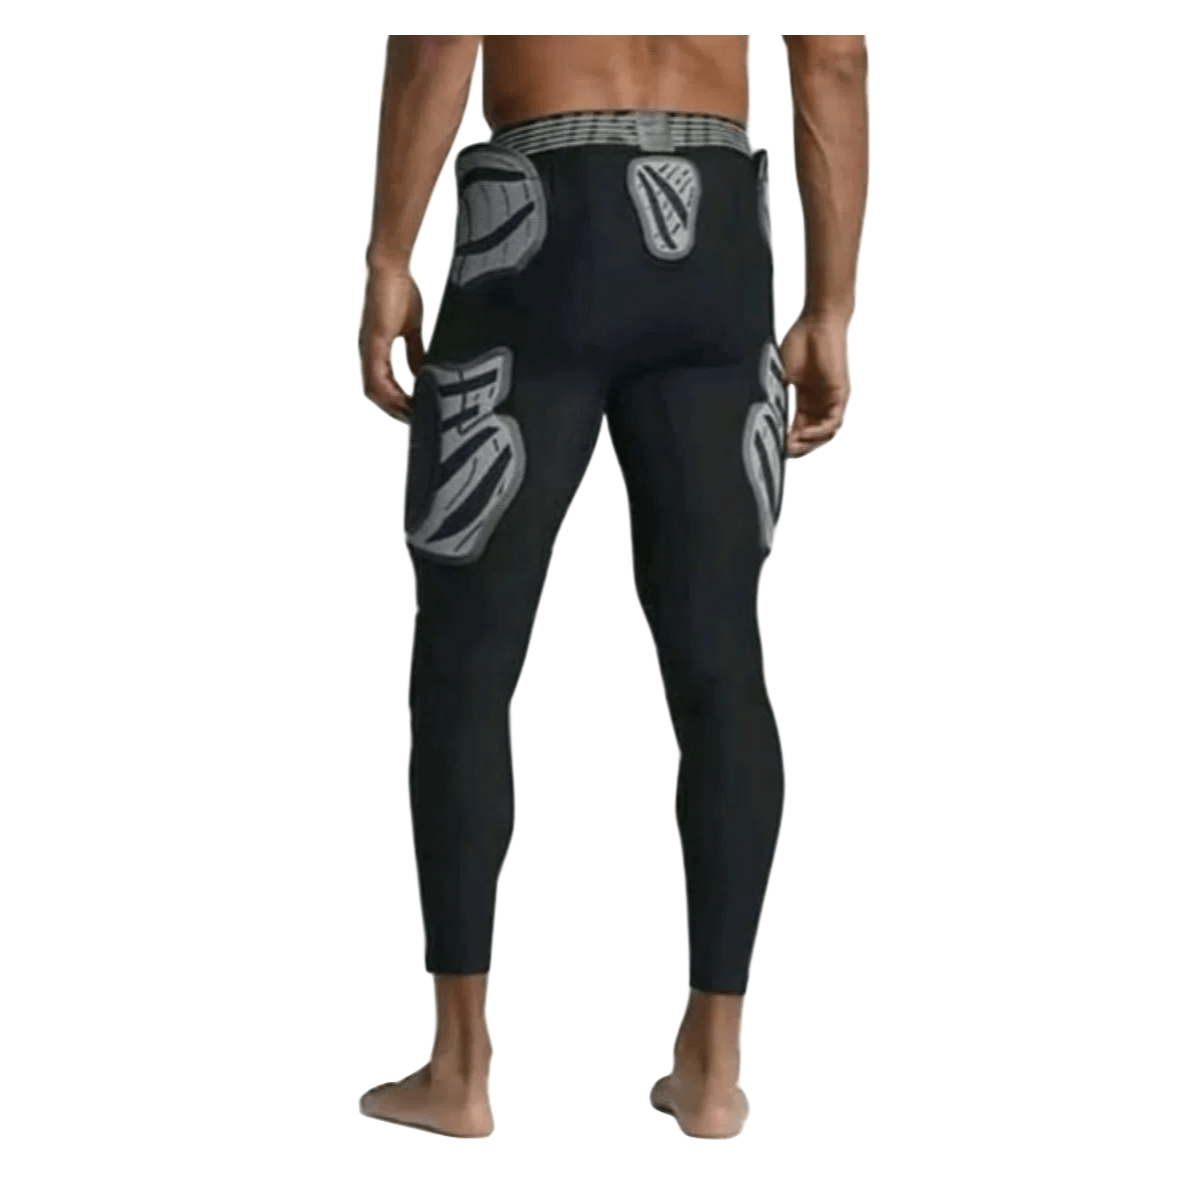 Nike Pro Combat Hyperstrong Hard Plate Football Tights Pants Grey